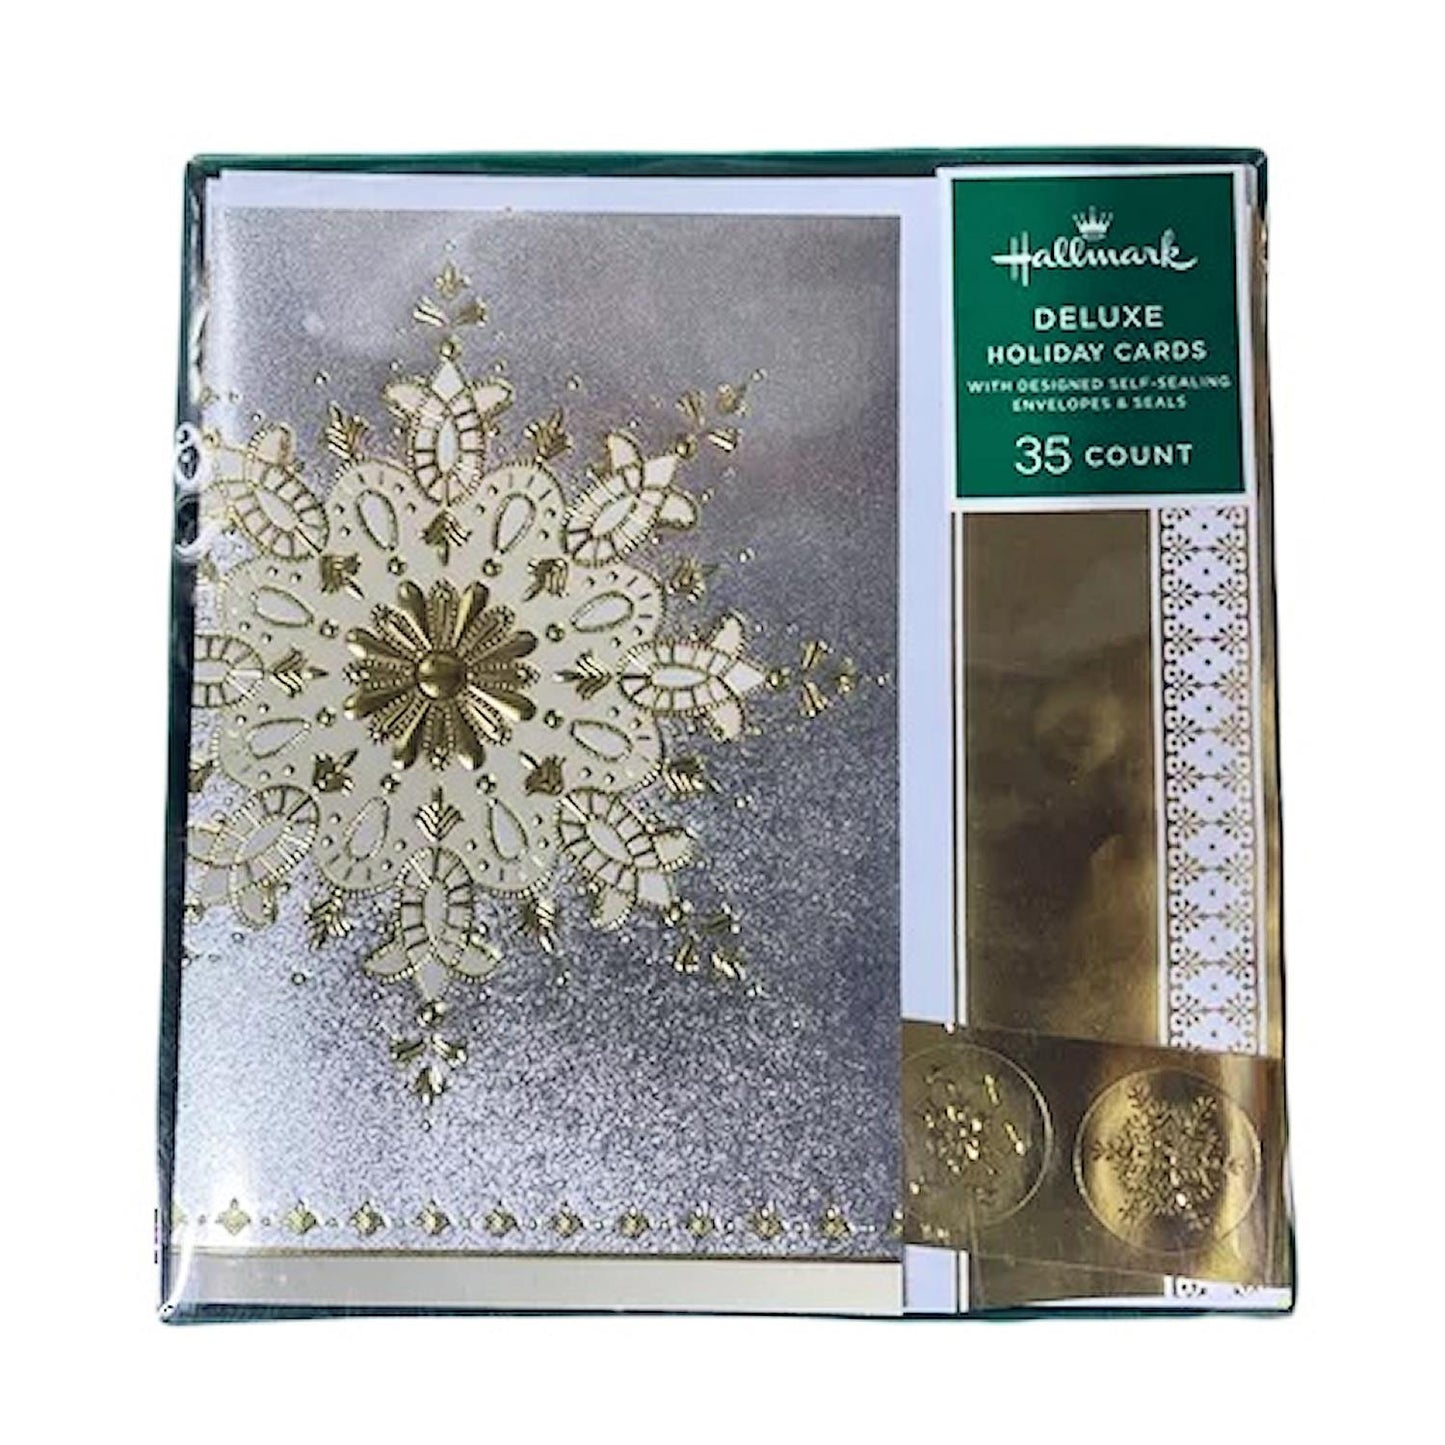 Hallmark Boxed Deluxe Christmas Cards Gold Medallion 35 Cards, Designed Self-Sealing Envelopes and Seals